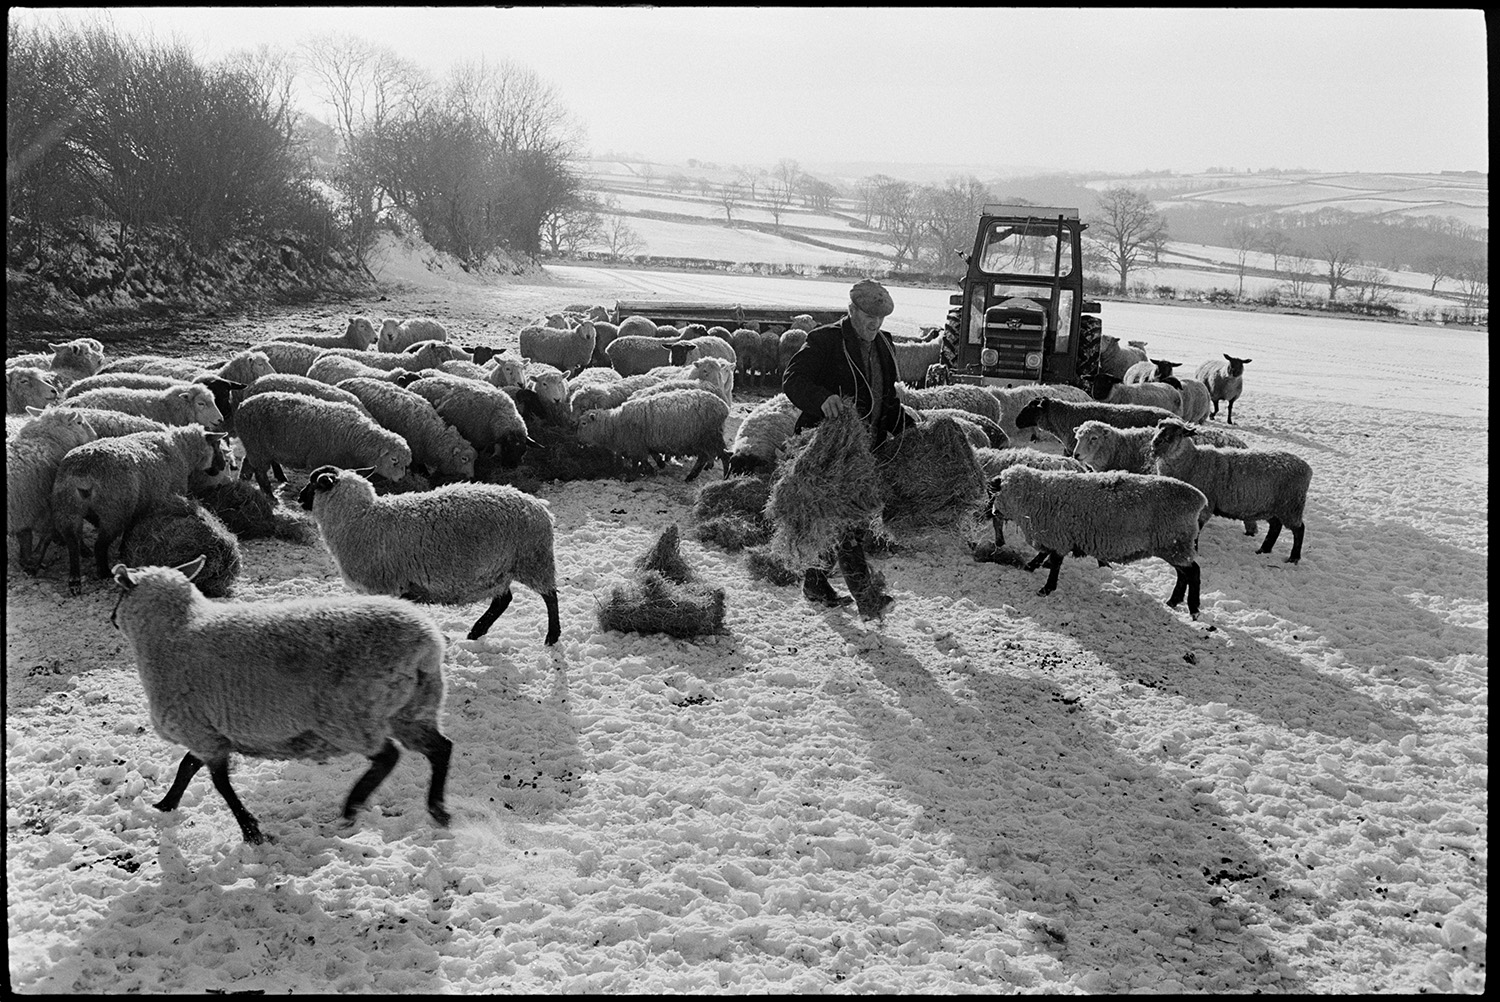 Snow, farmer feeding sheep with tractor and link box, carrying hay in wood, bright sun, snowdrift. 
[Alf Pugsley feeding hay to sheep in a snow covered field at Lower Langham, Dolton. His tractor is parked next to a feeder in the field.]